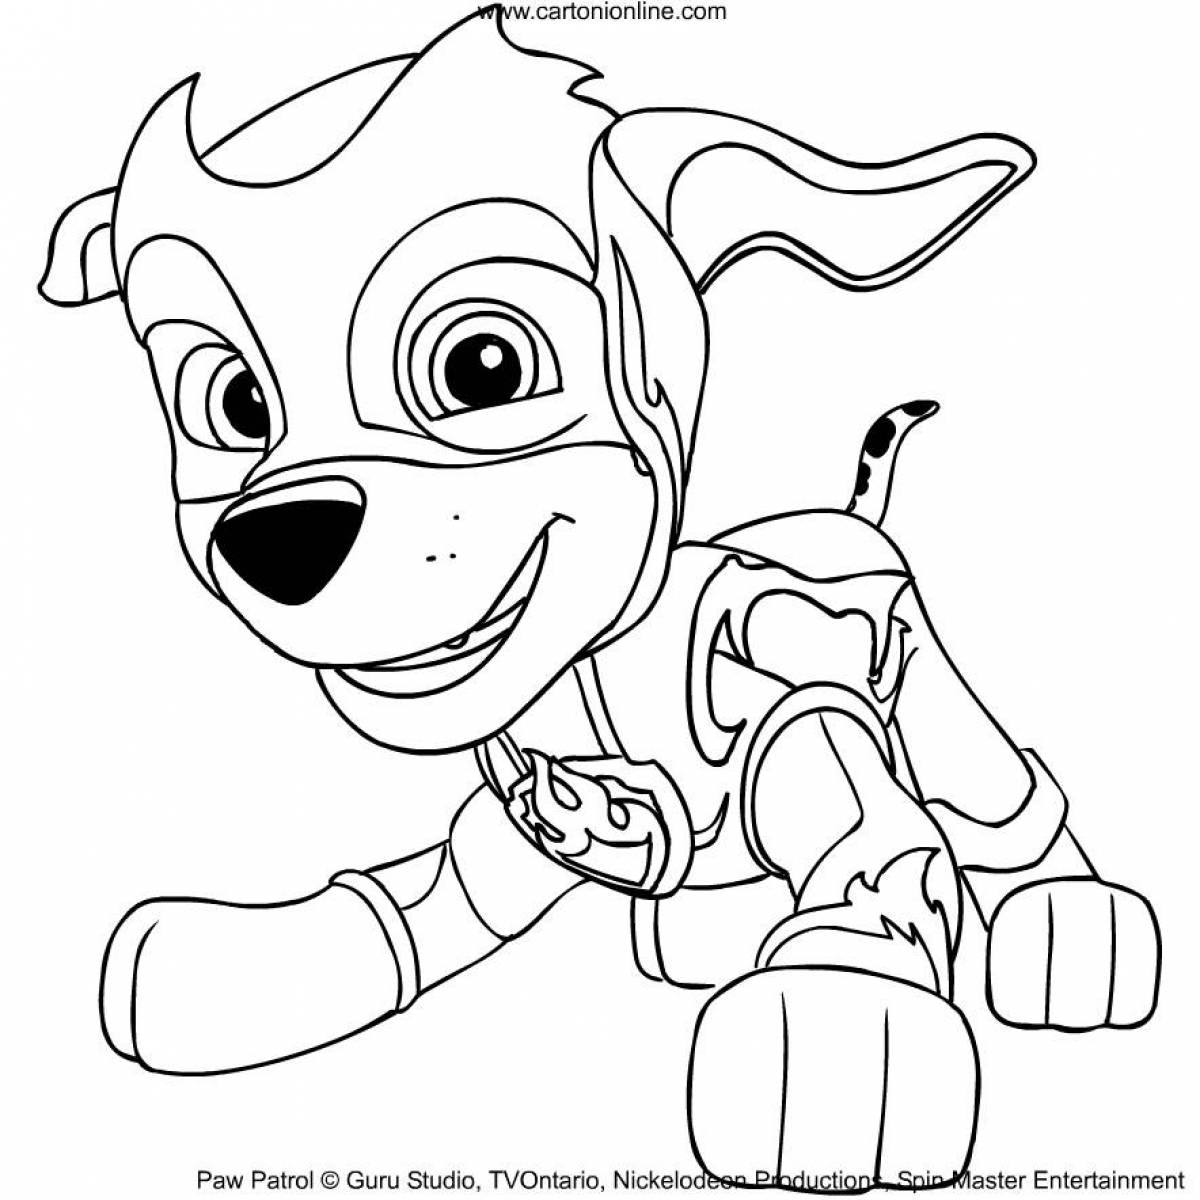 Coloured gorgeous paw patrol marshal coloring book